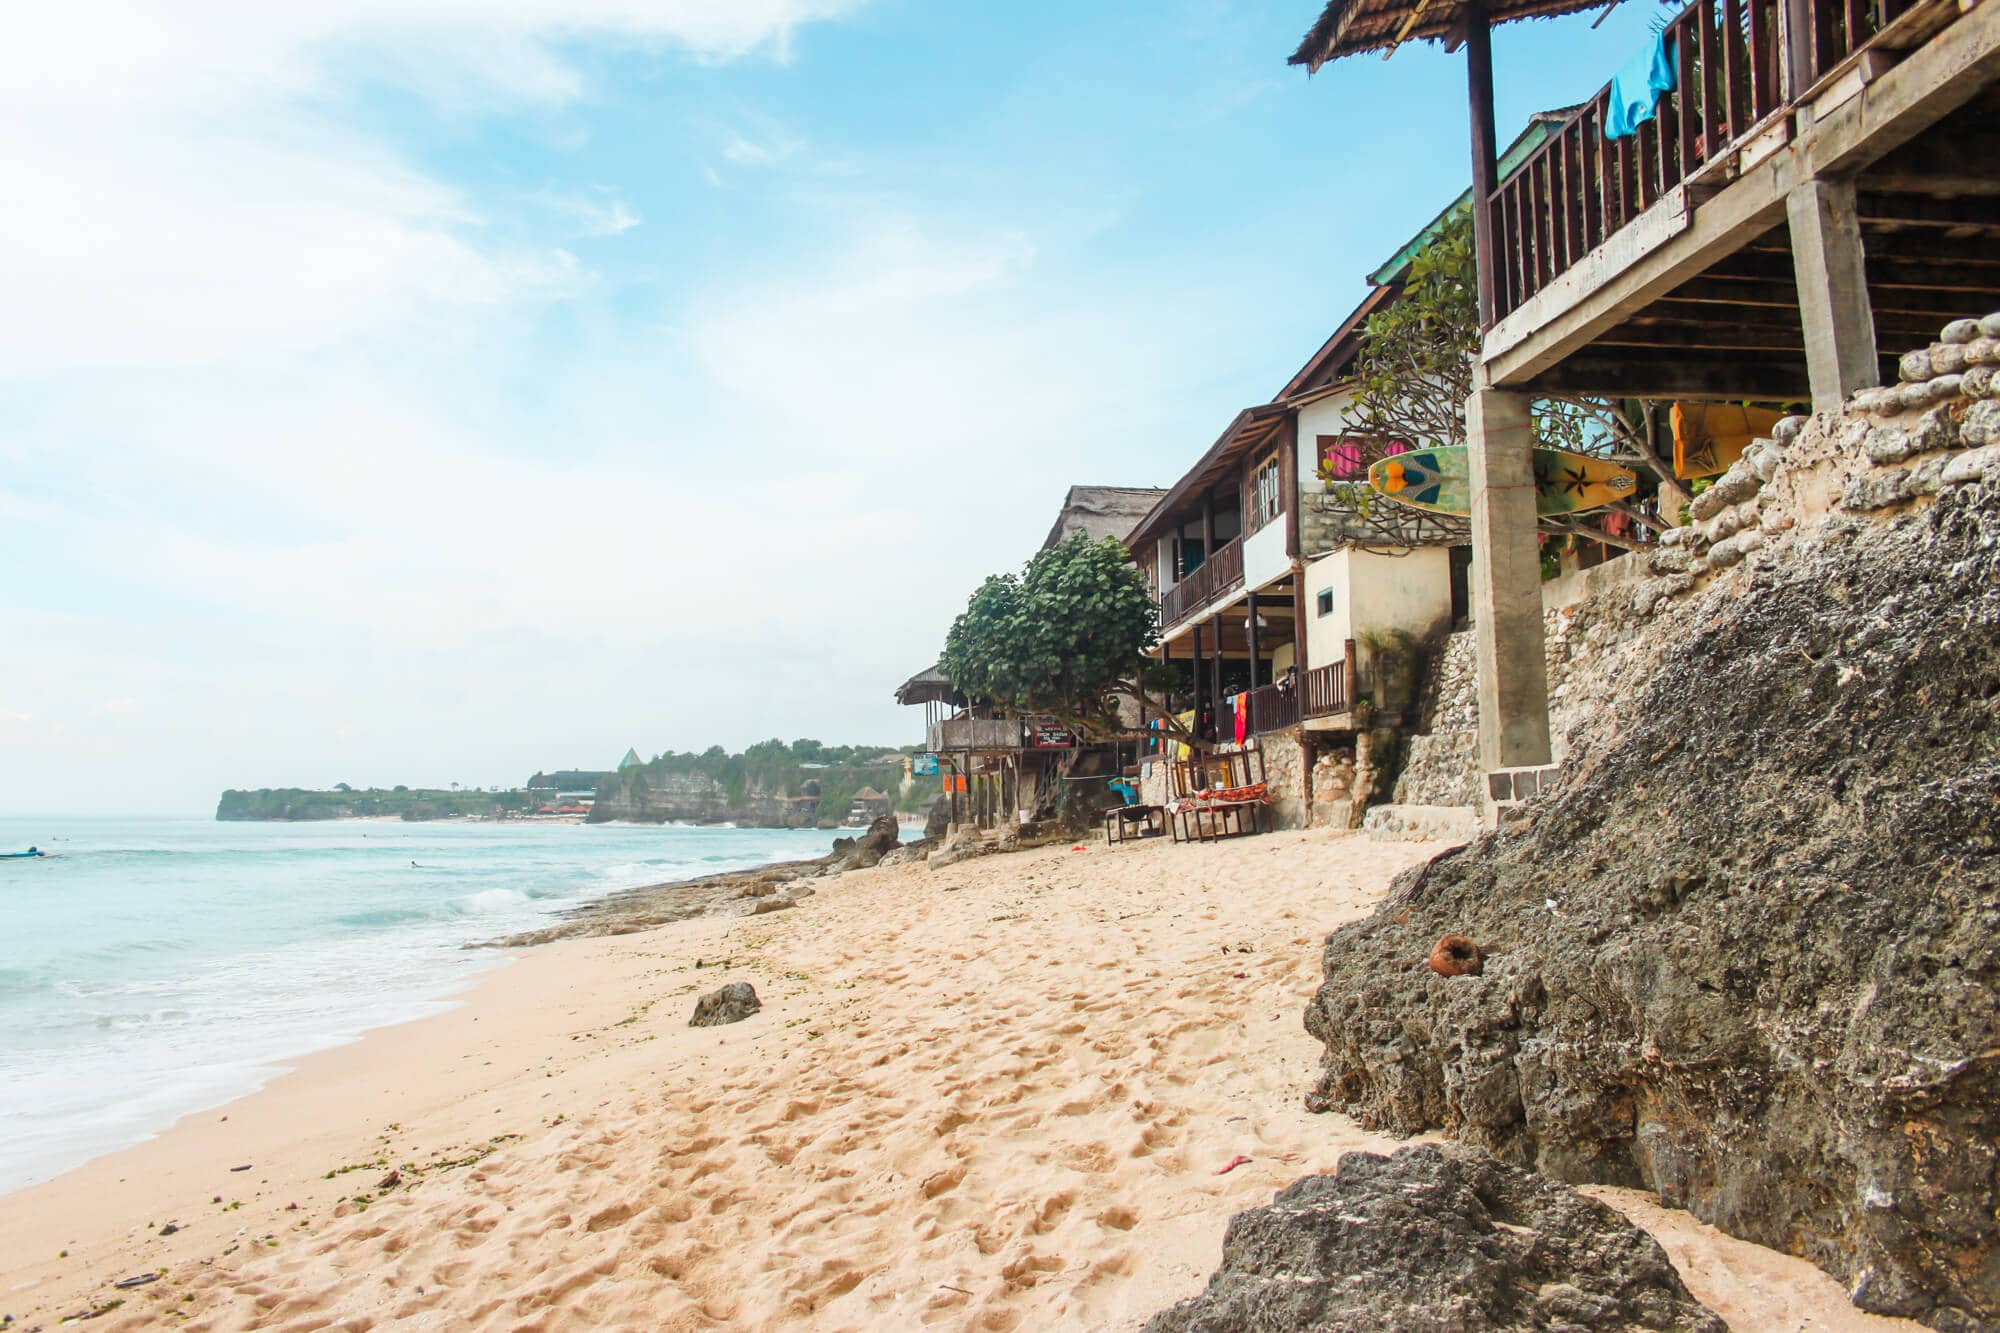 Where to stay in Bali: A complete guide to the different areas on the island - Bingin Beach in South Bali